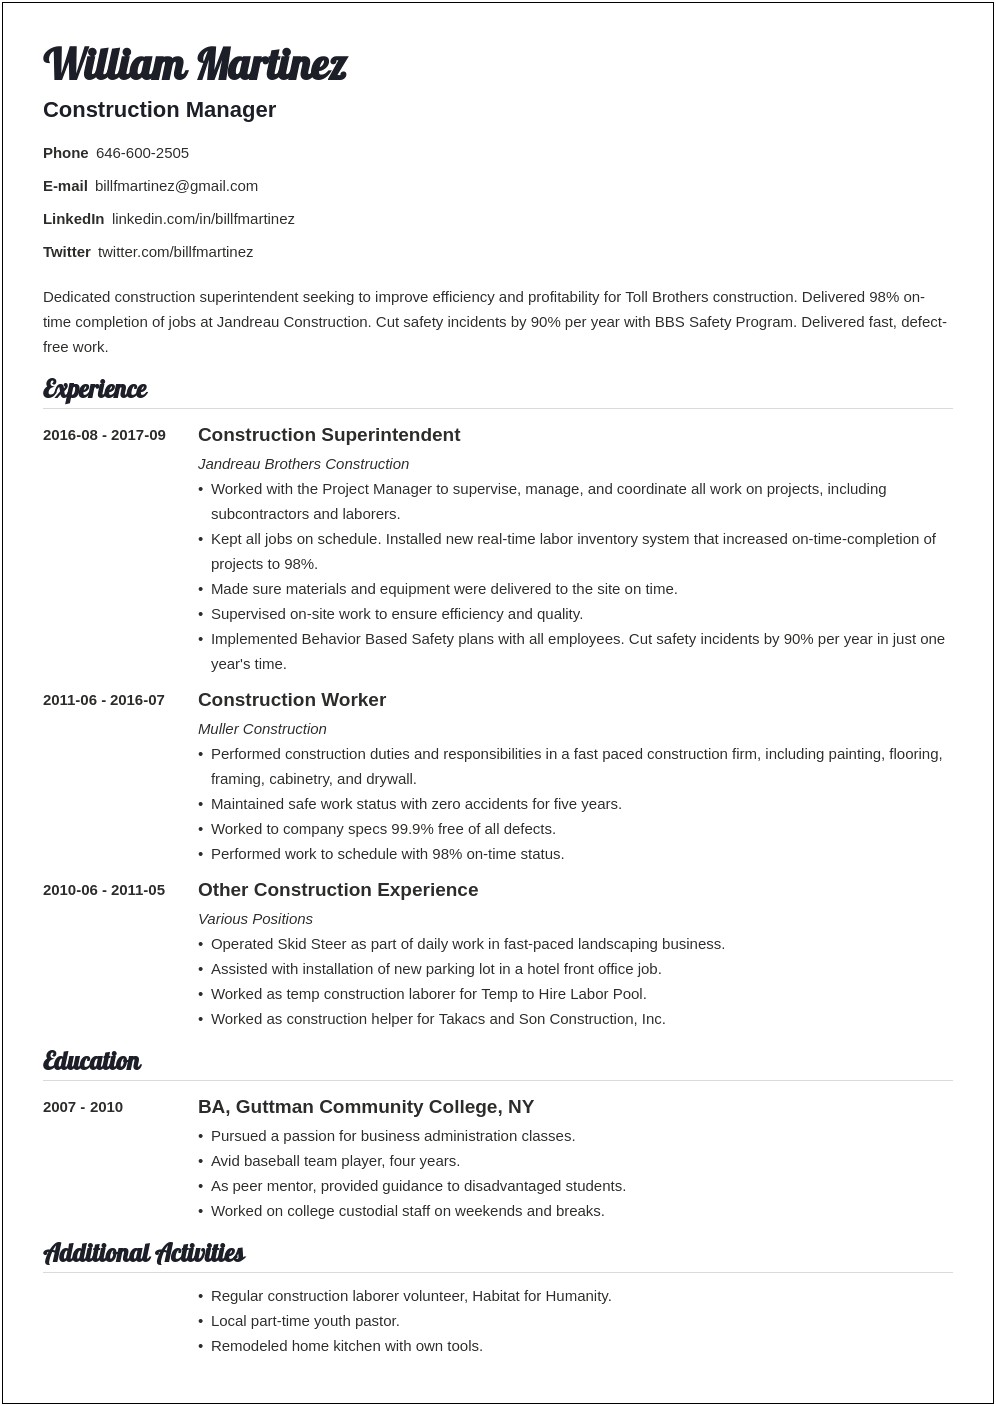 Resume Objective Statement For Construction